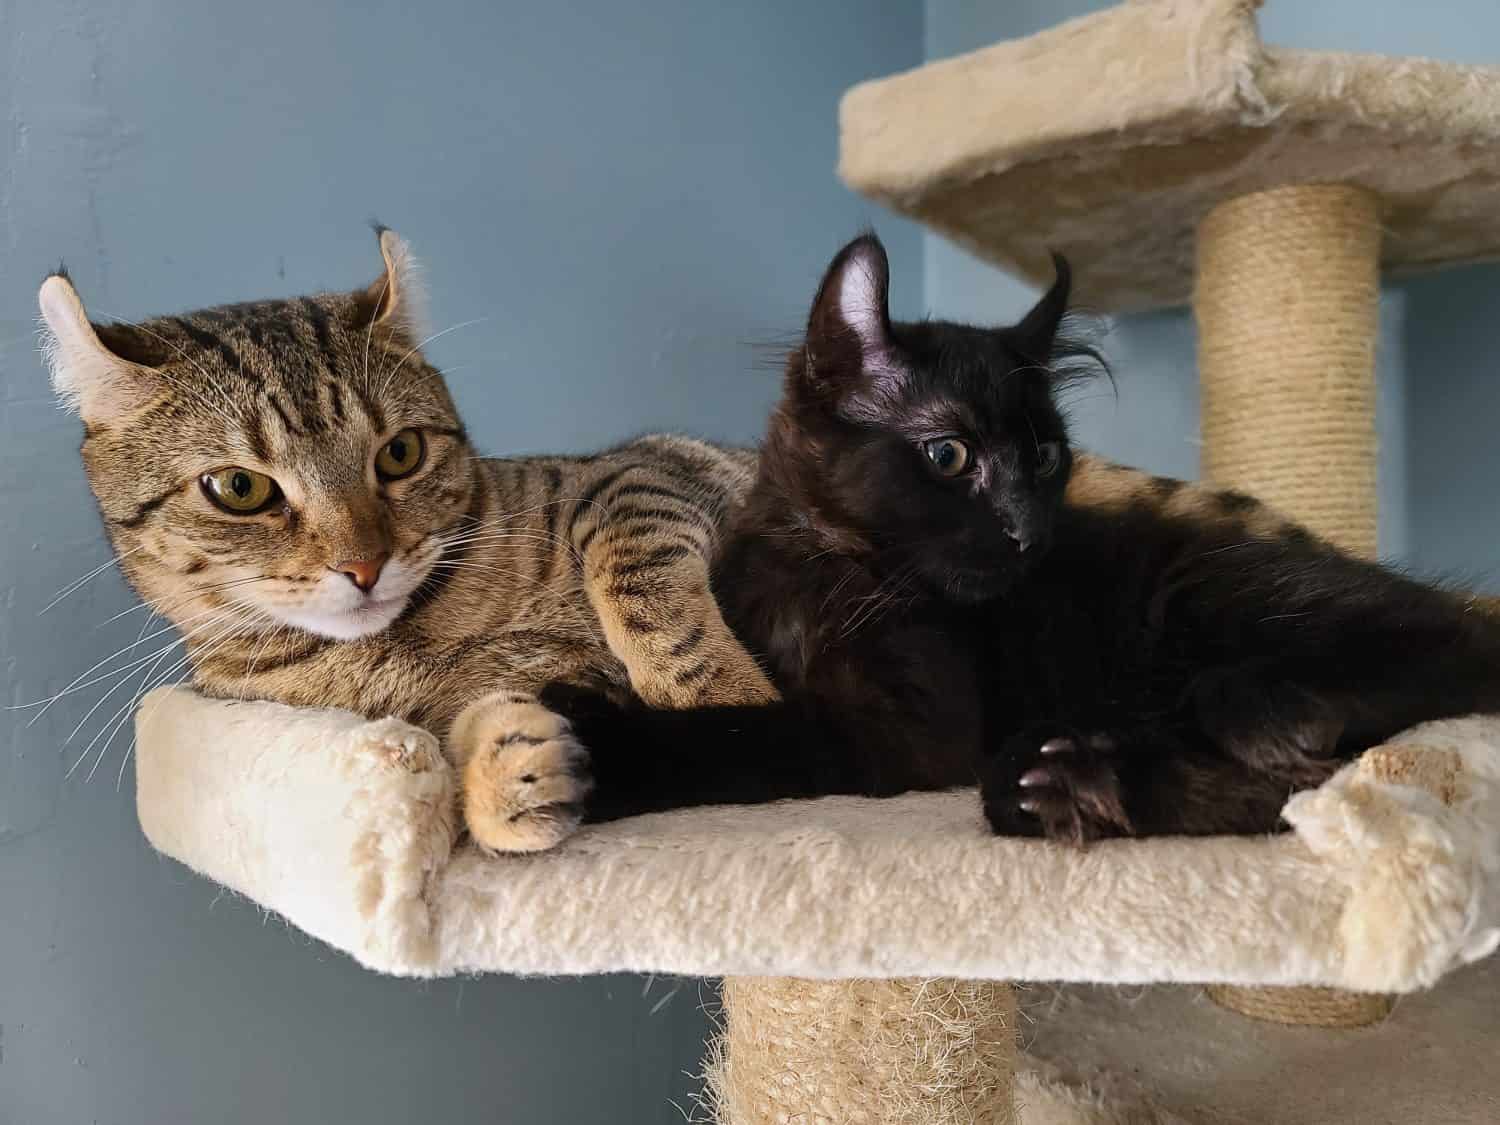 Two highlander kittens curled up on a cat tower together. The younger cat is all black and the older cat is brown and black stripes.